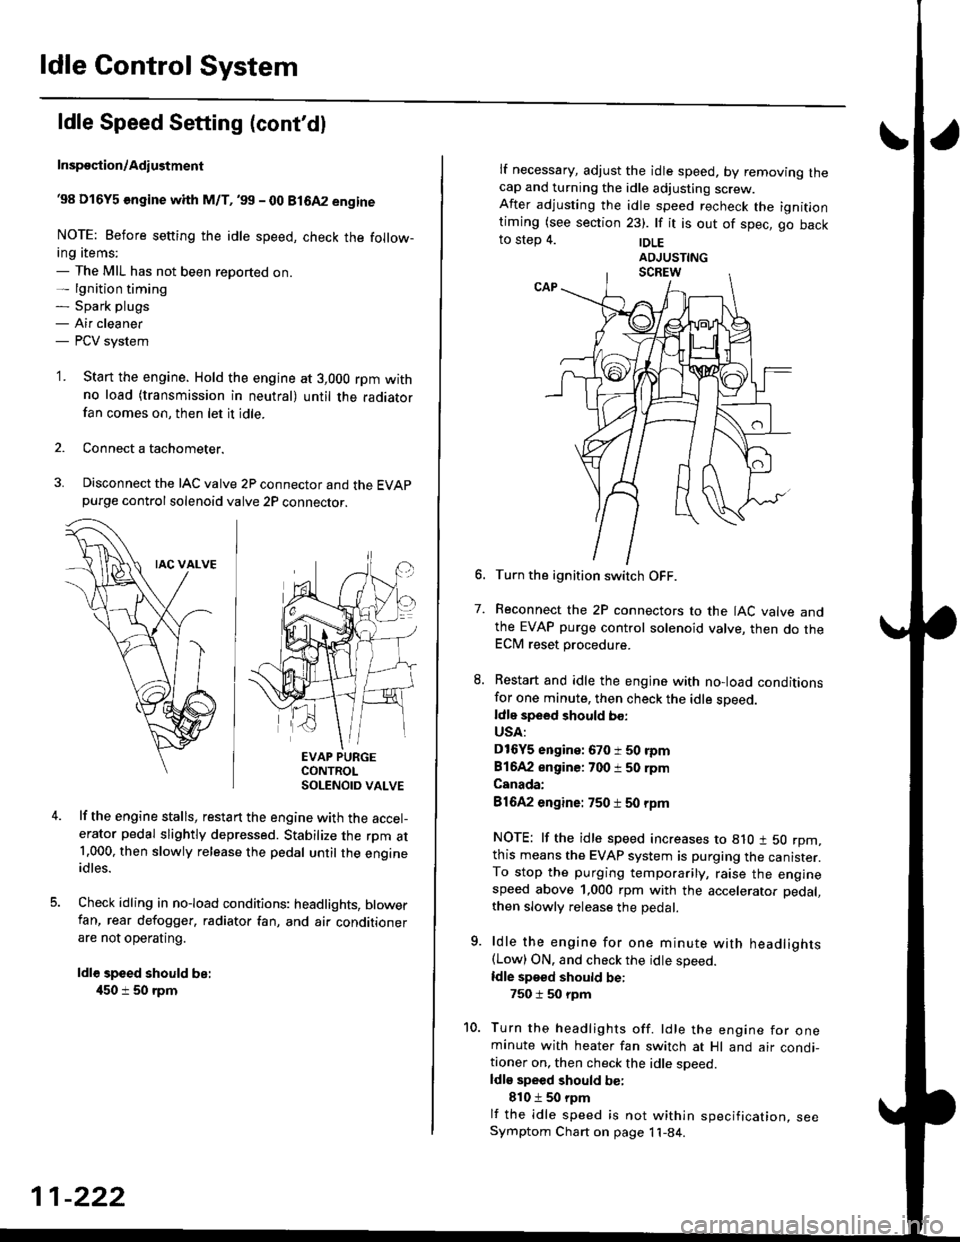 HONDA CIVIC 1996 6.G Service Manual ldle Control System
ldle Speed Setting (contdl
Inspeqtion/Adiustment
38 D16Y5 engine whh M/T,99 - 00 81642 engine
NOTE: Before setting the idle speed, check the follow-ing items;- The MIL has not be